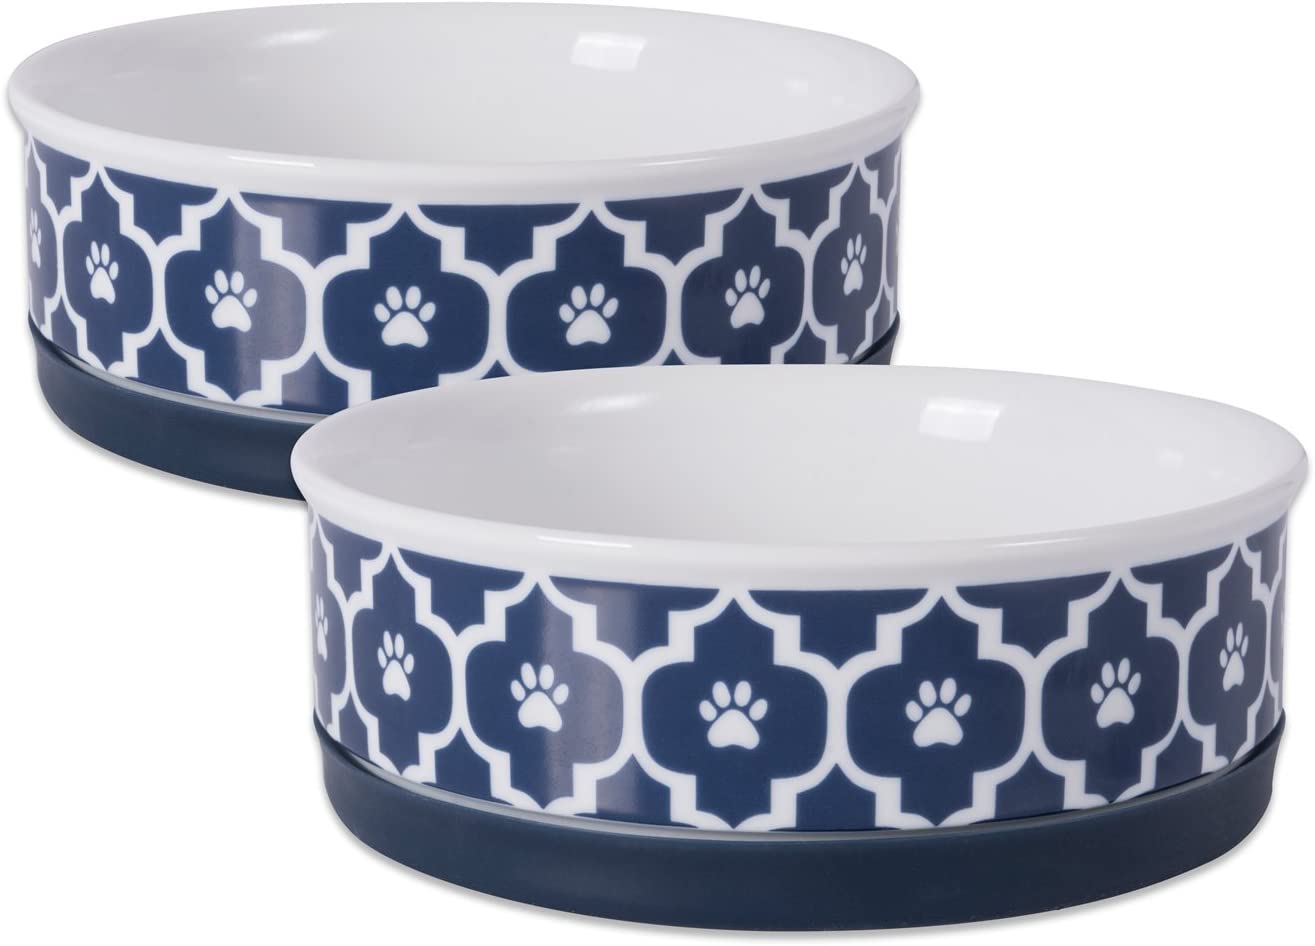 5 best dog bowls for Yorkies